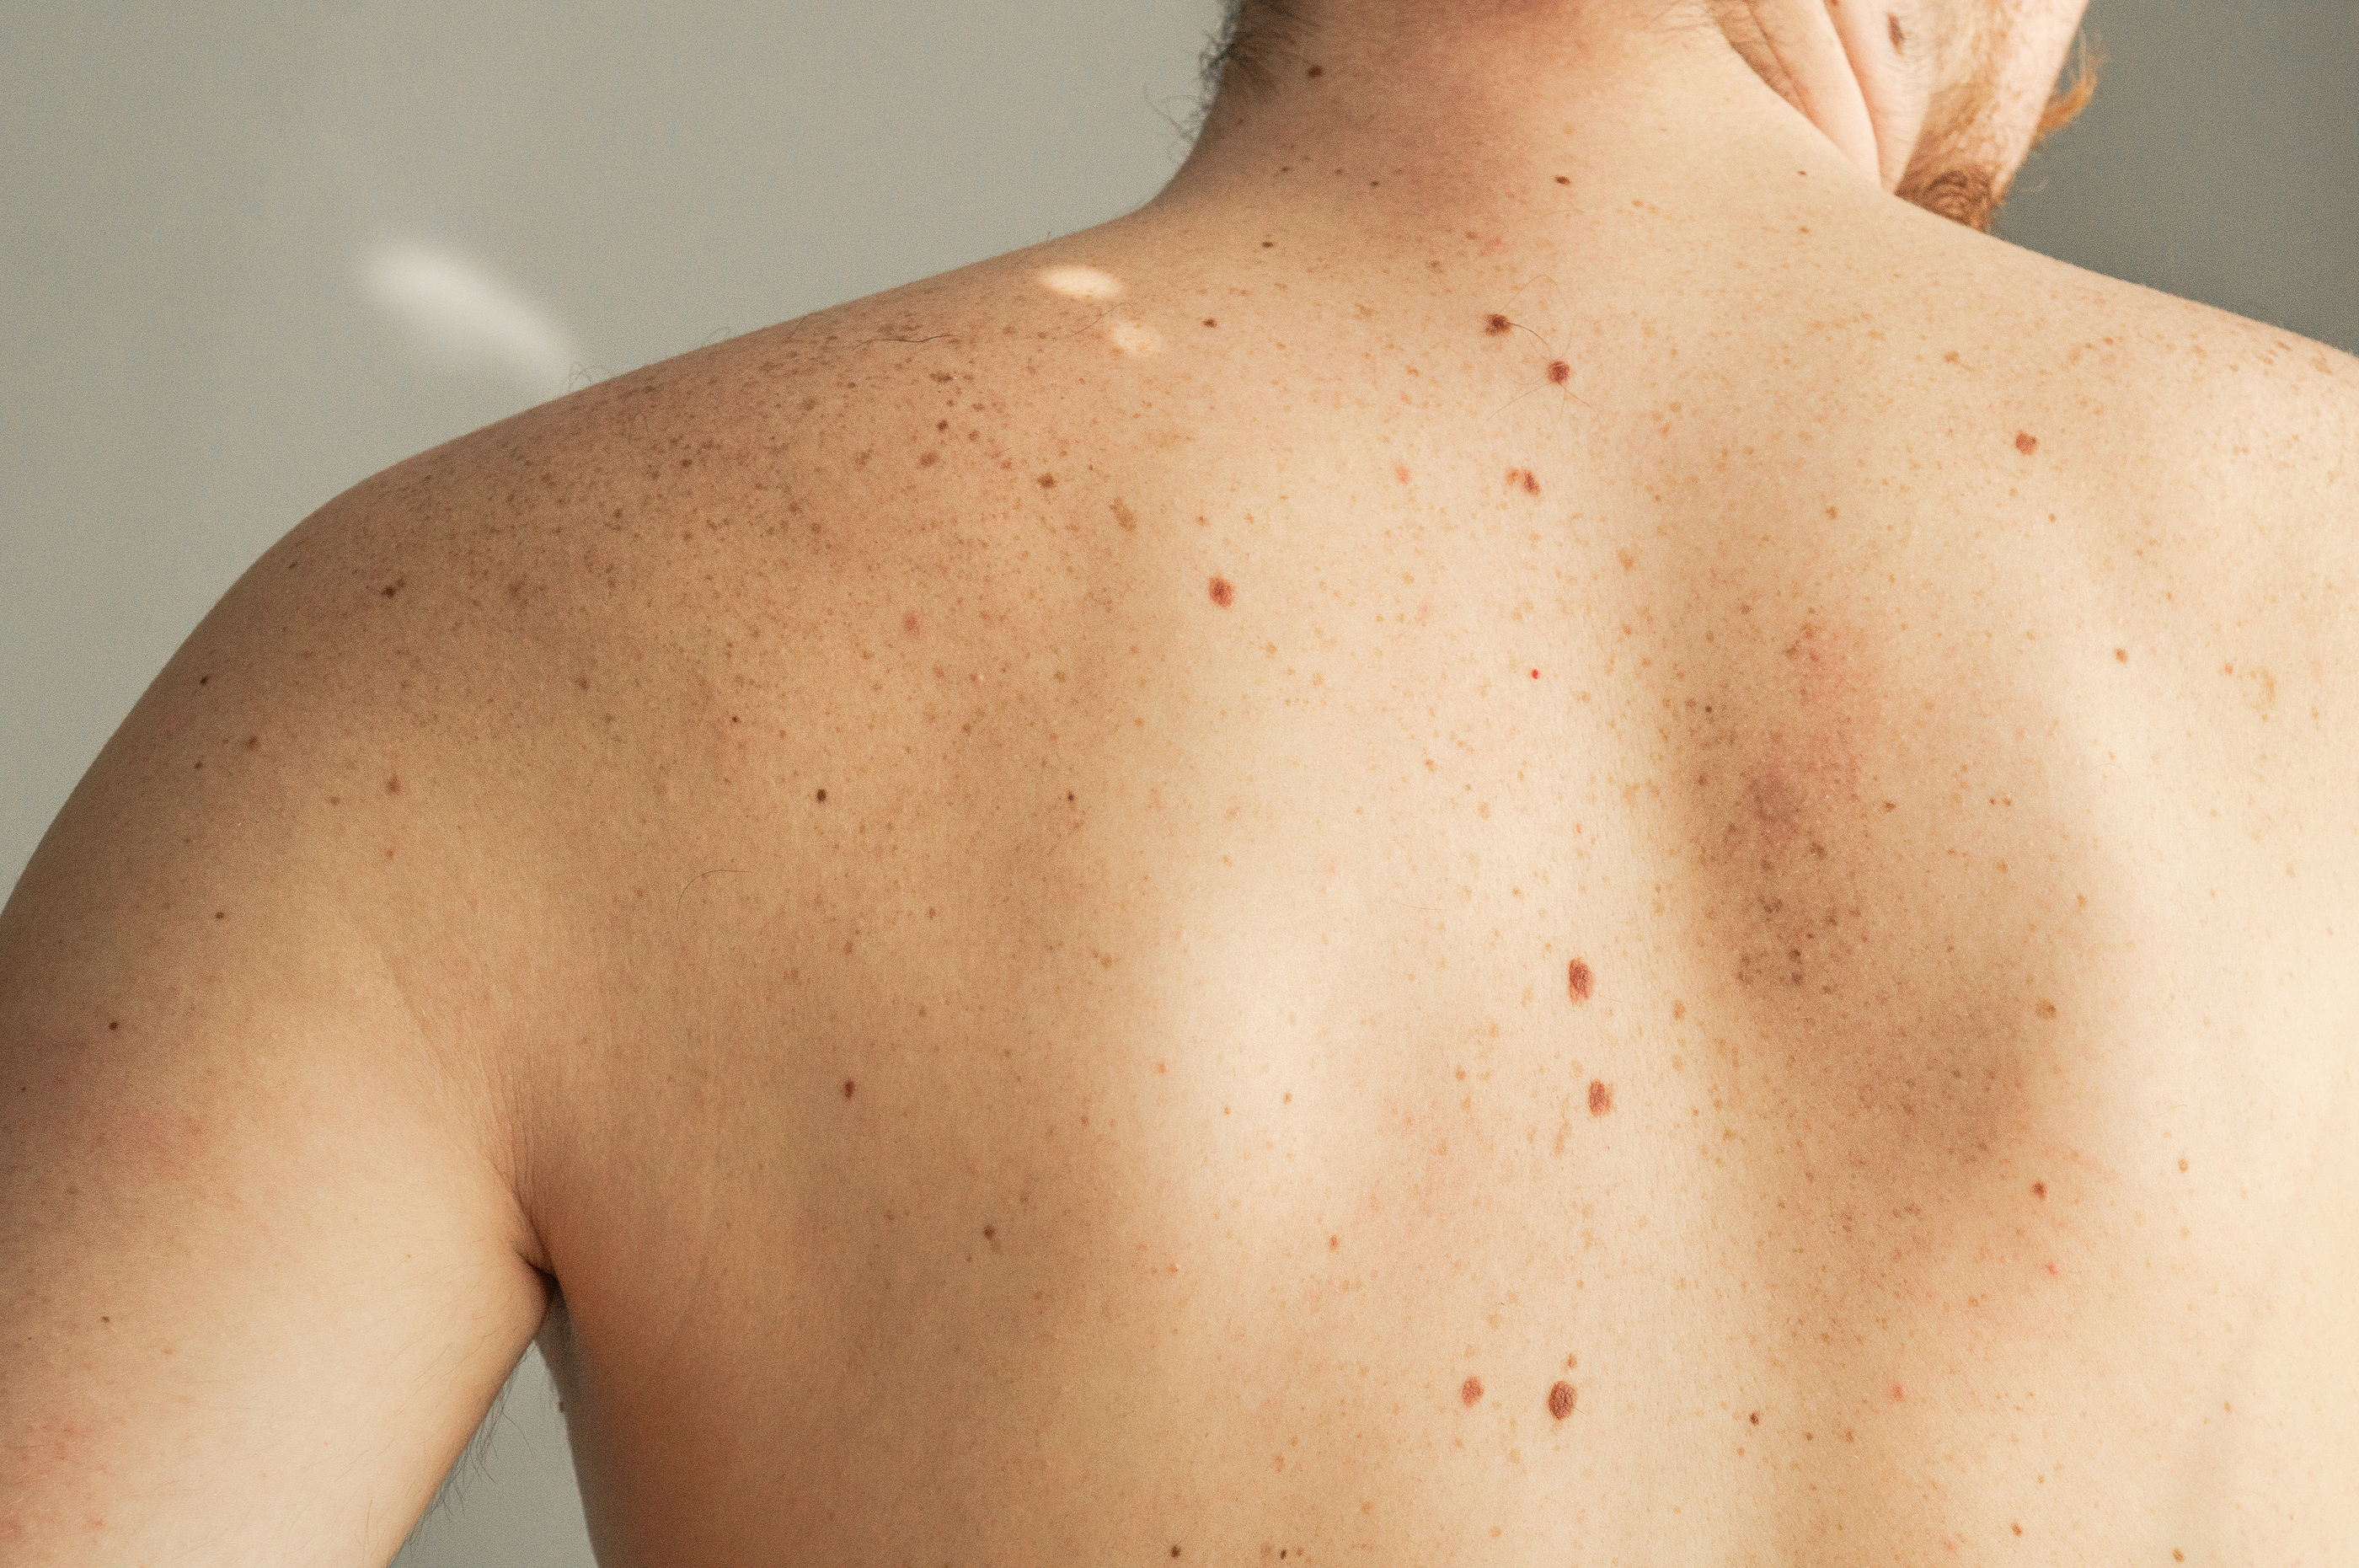 Why Do We Have Moles Over Our Bodies and What Do They Do?